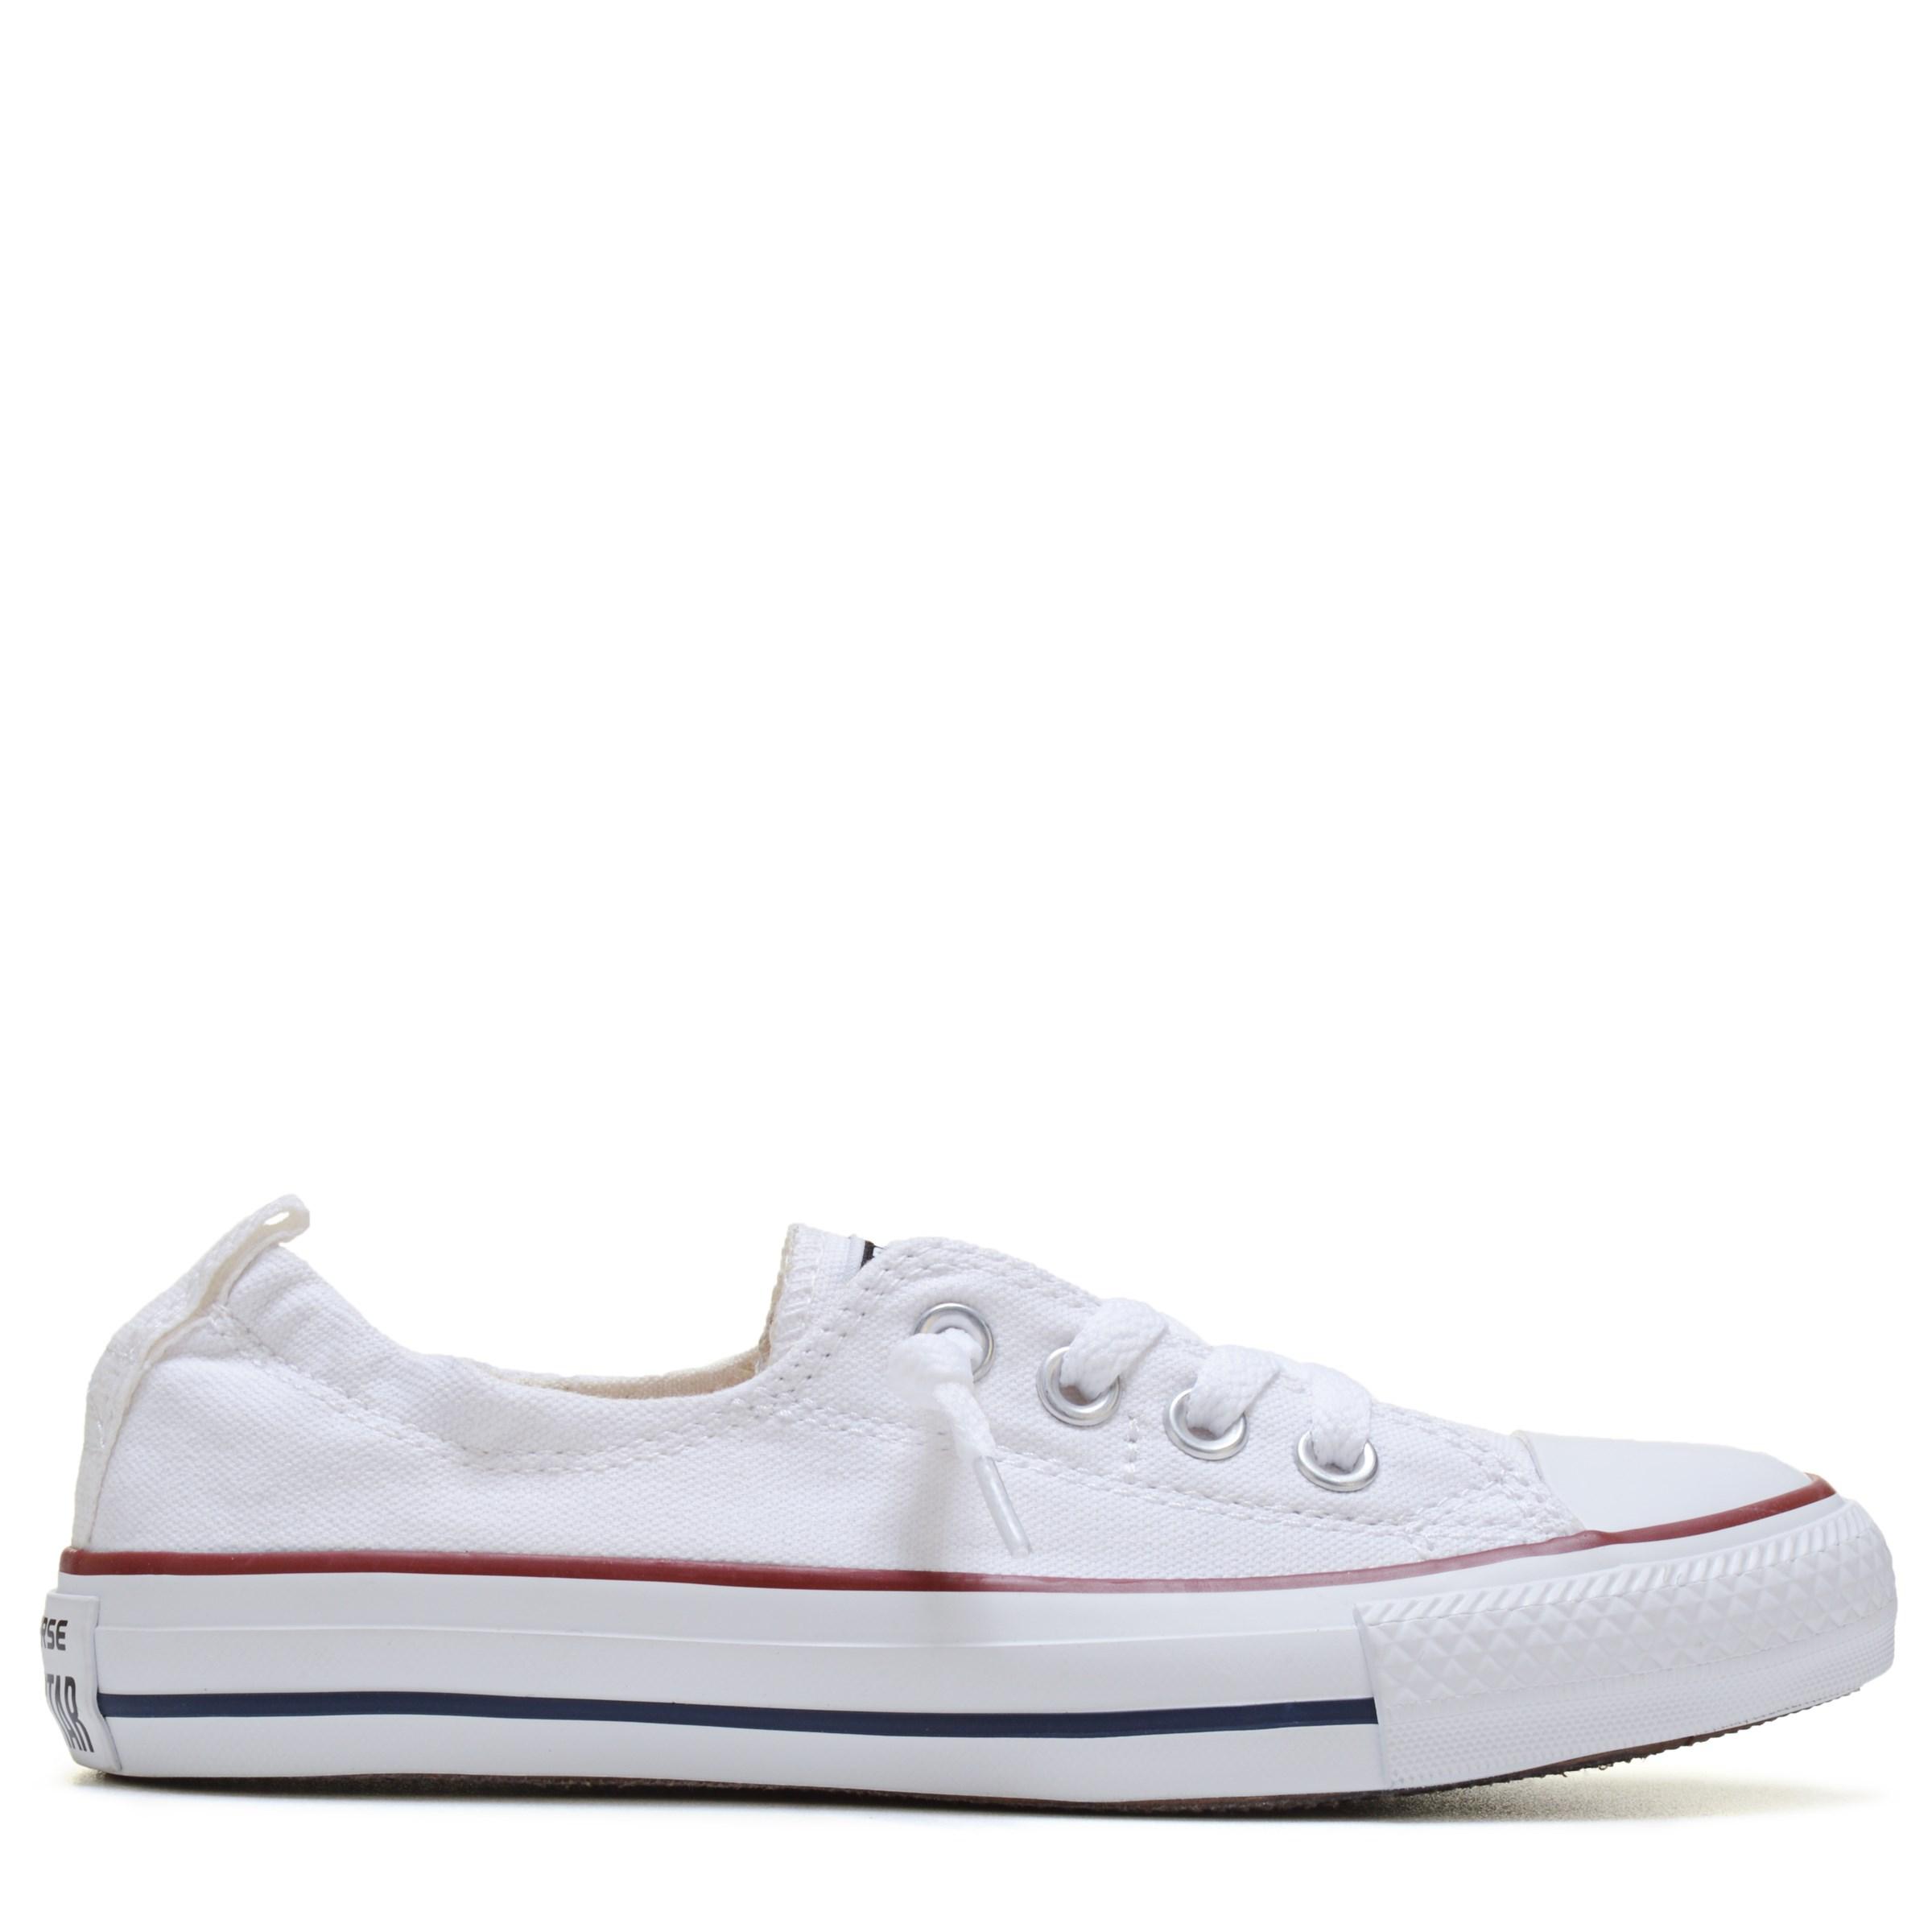 Converse Canvas Chuck Taylor All Star Shoreline Low Top Sneakers in ...